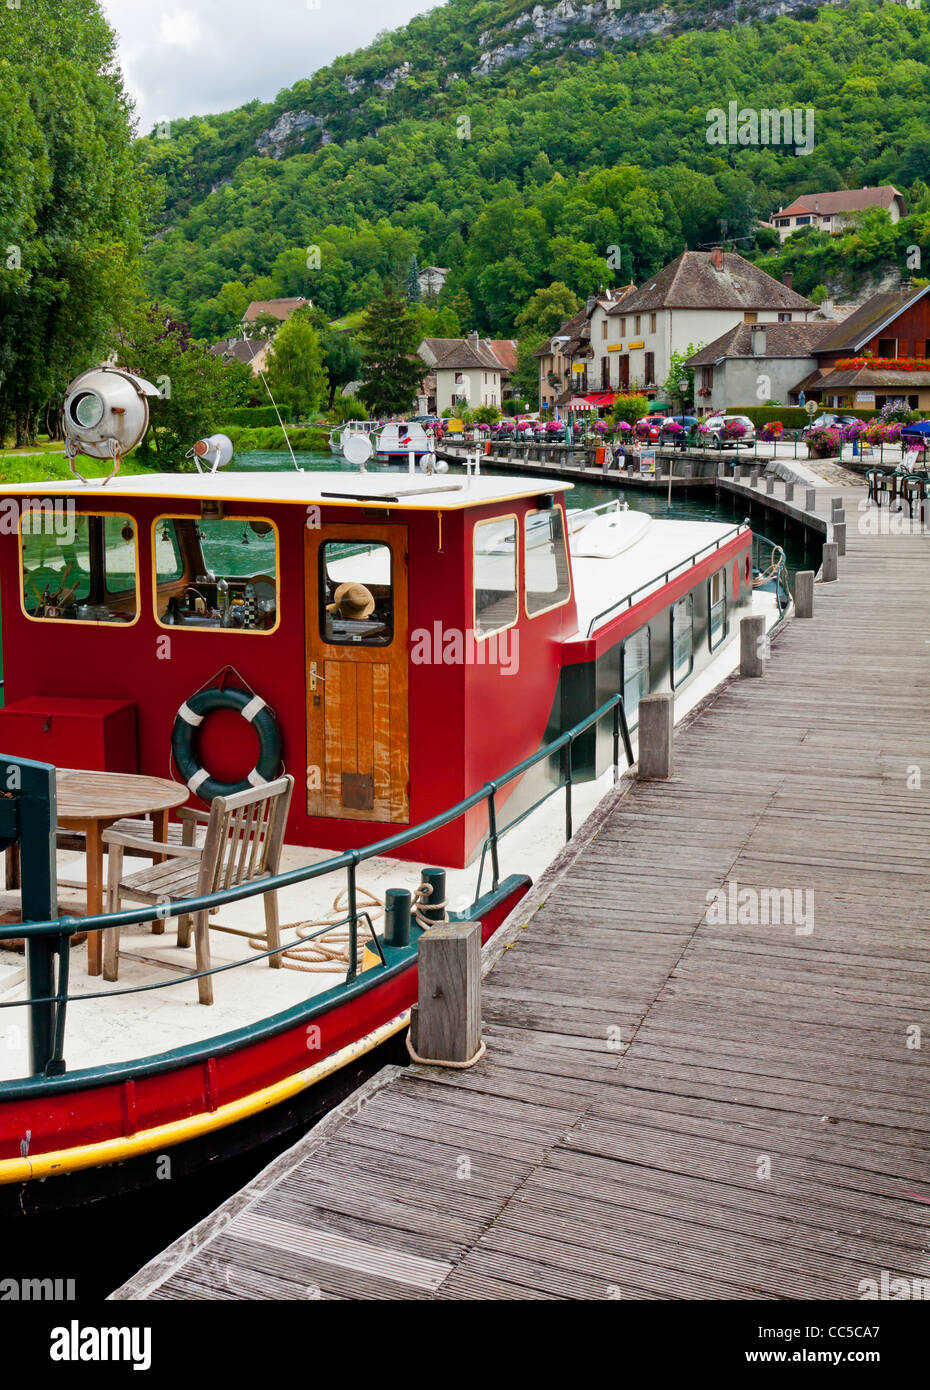 Boat moored on the Canal de Savieres in Chanaz in the Savoie area of the French Alps near to Lac du Bourget south eastern France Stock Photo